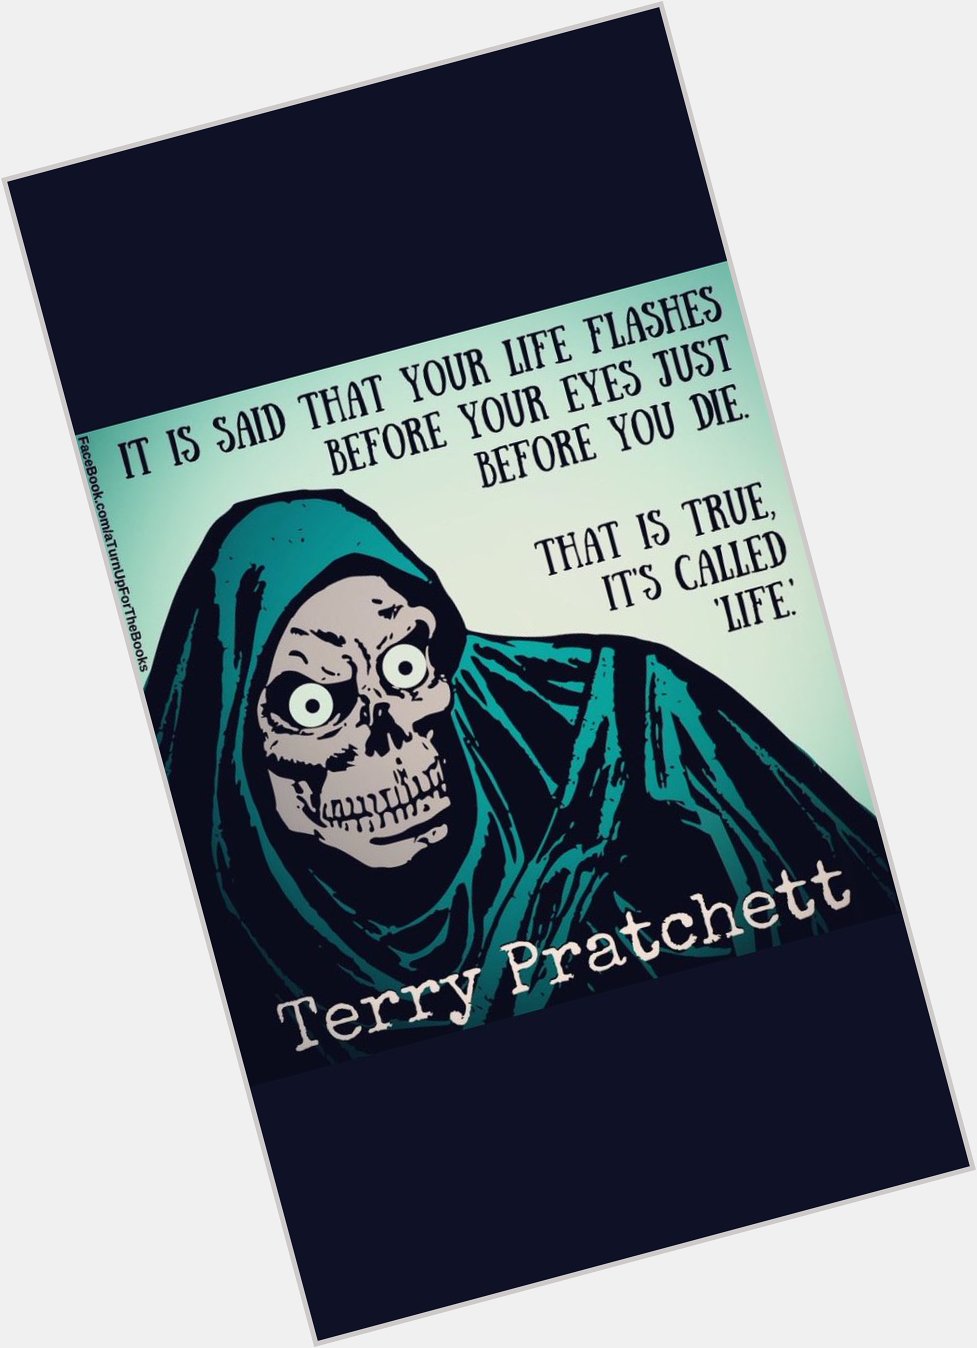 Happy birthday to the late, great Sit Terry Pratchett! A wonderful companion in lockdown 